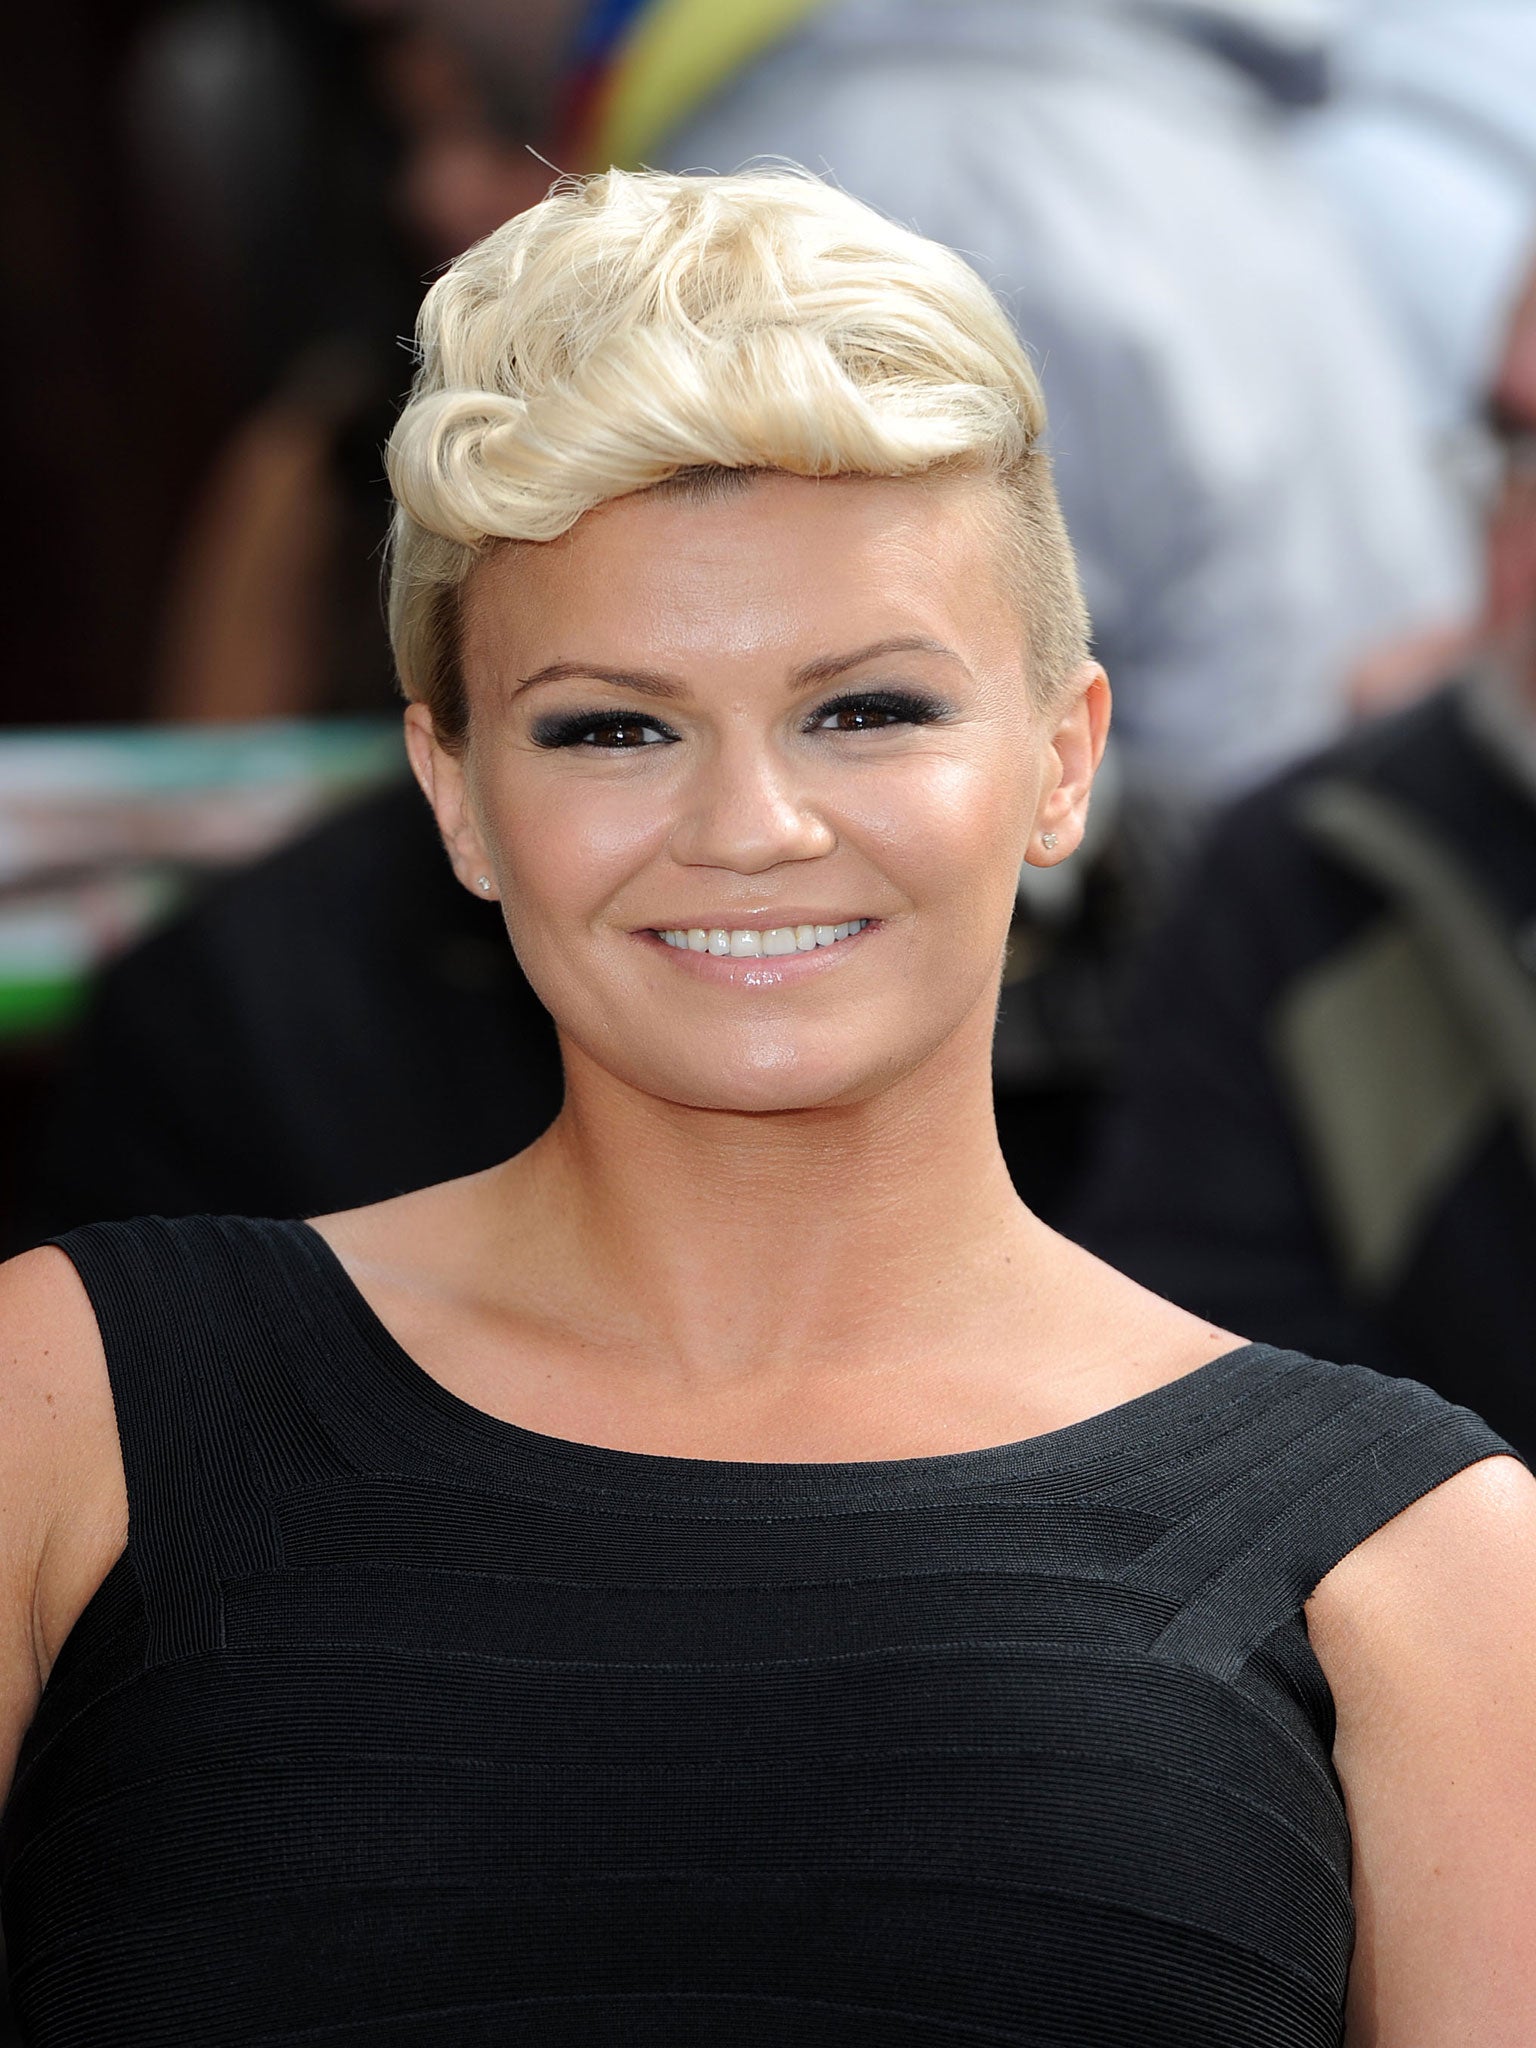 Kerry Katona has been dropped as the face of payday lenders Cash Lady after filing for bankruptcy a second time